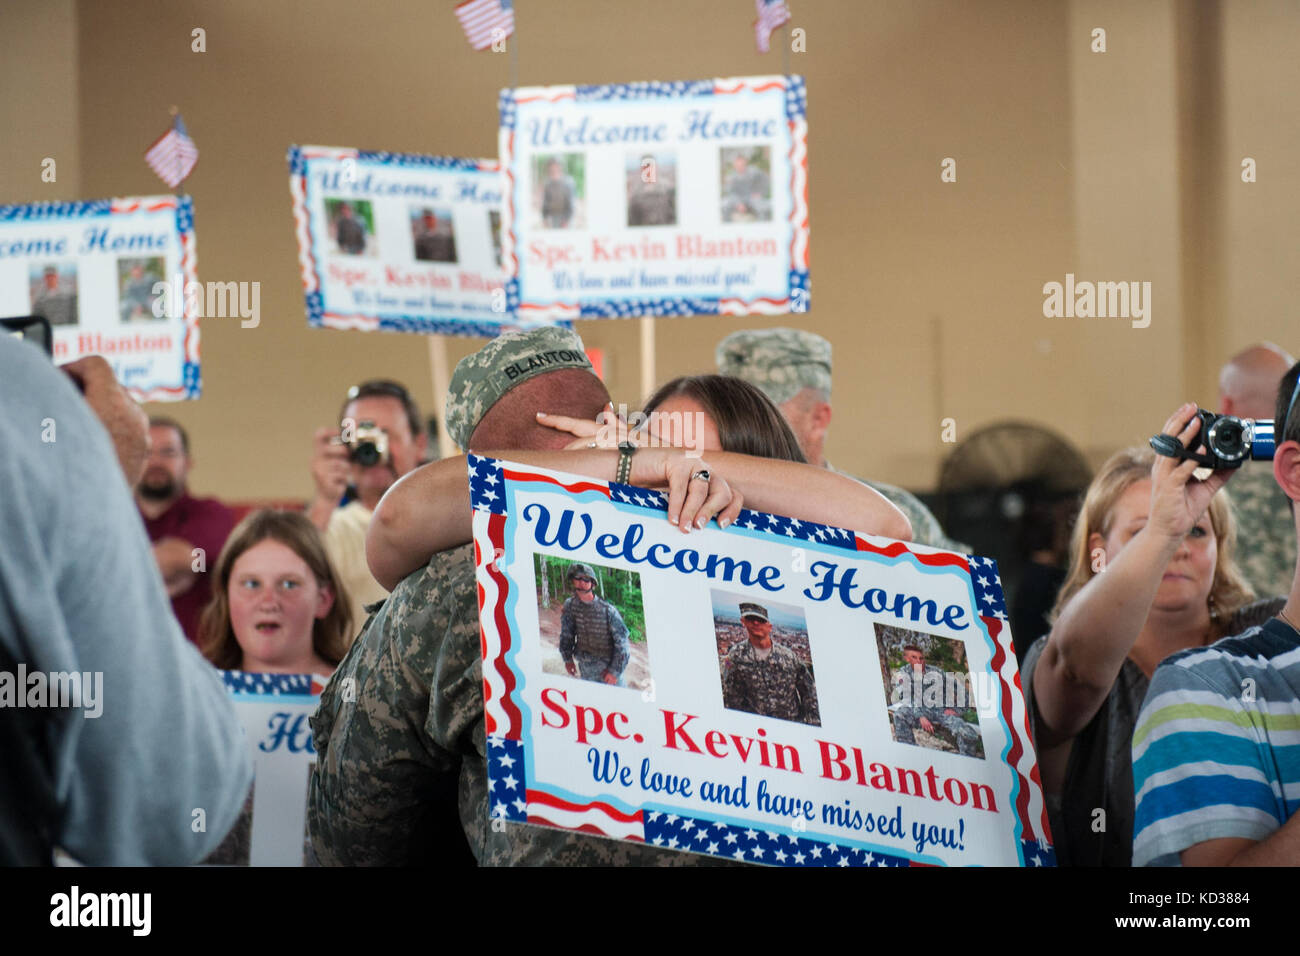 U.S. Army Soldiers with the 132nd Military Police Company, South Carolina Army National Guard, welcome home coming ceremony in the West Columbia Army National Guard Armory, S.C., June 4, 2013. The 132nd MP Company returns home after a nine-month deployment to Kosovo. The 132nd MP Company assisted in maintaining a safe and secure environment as part of Kosovo Force (KFOR) 16. (U.S. Air National Guard photo by Staff Sgt. Jorge Intriago/Released) Stock Photo